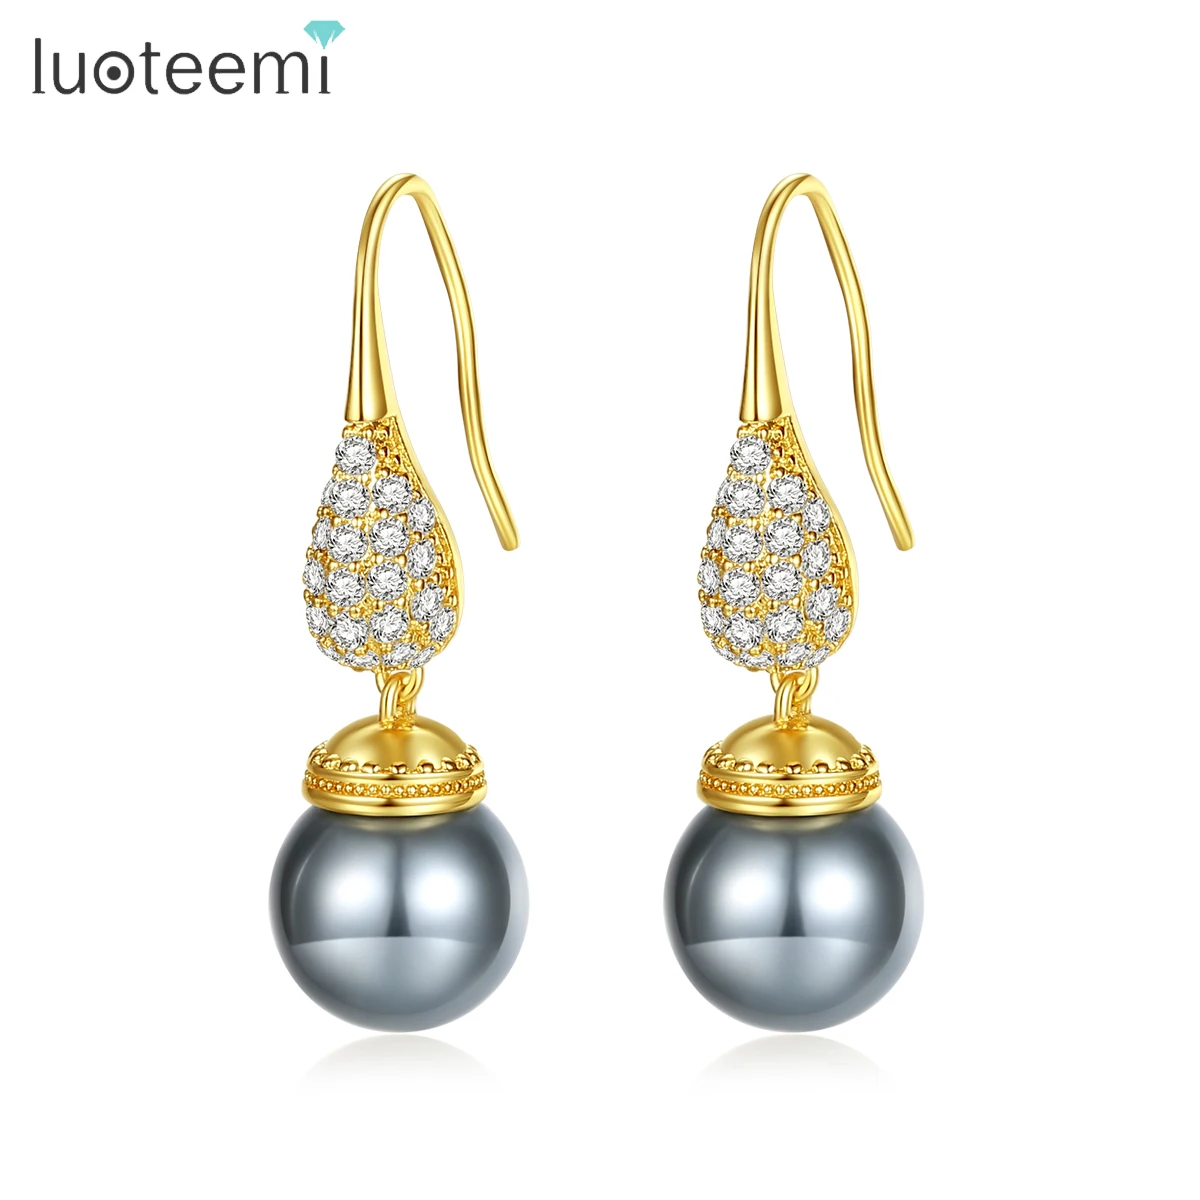 

LUOTEEMI Imitation Pearls Drop Earrings for Women Cubic Zircon Fashion Elegant Jewelry Dating Party Boucle D'Oreille Femme Gifts